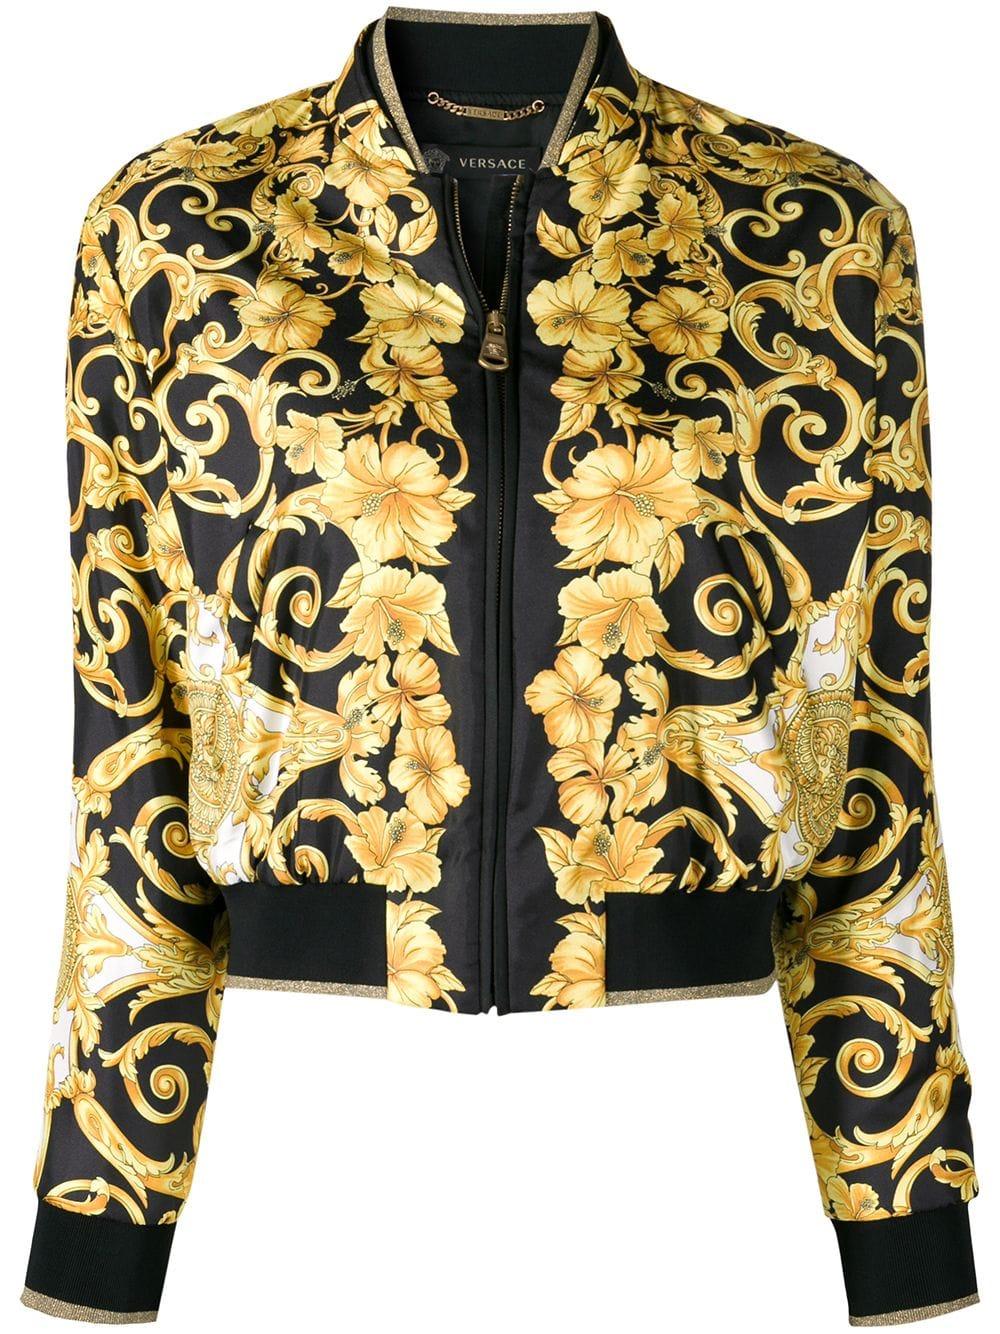 Versace Silk Fitted Bomber Jacket in Black - Lyst